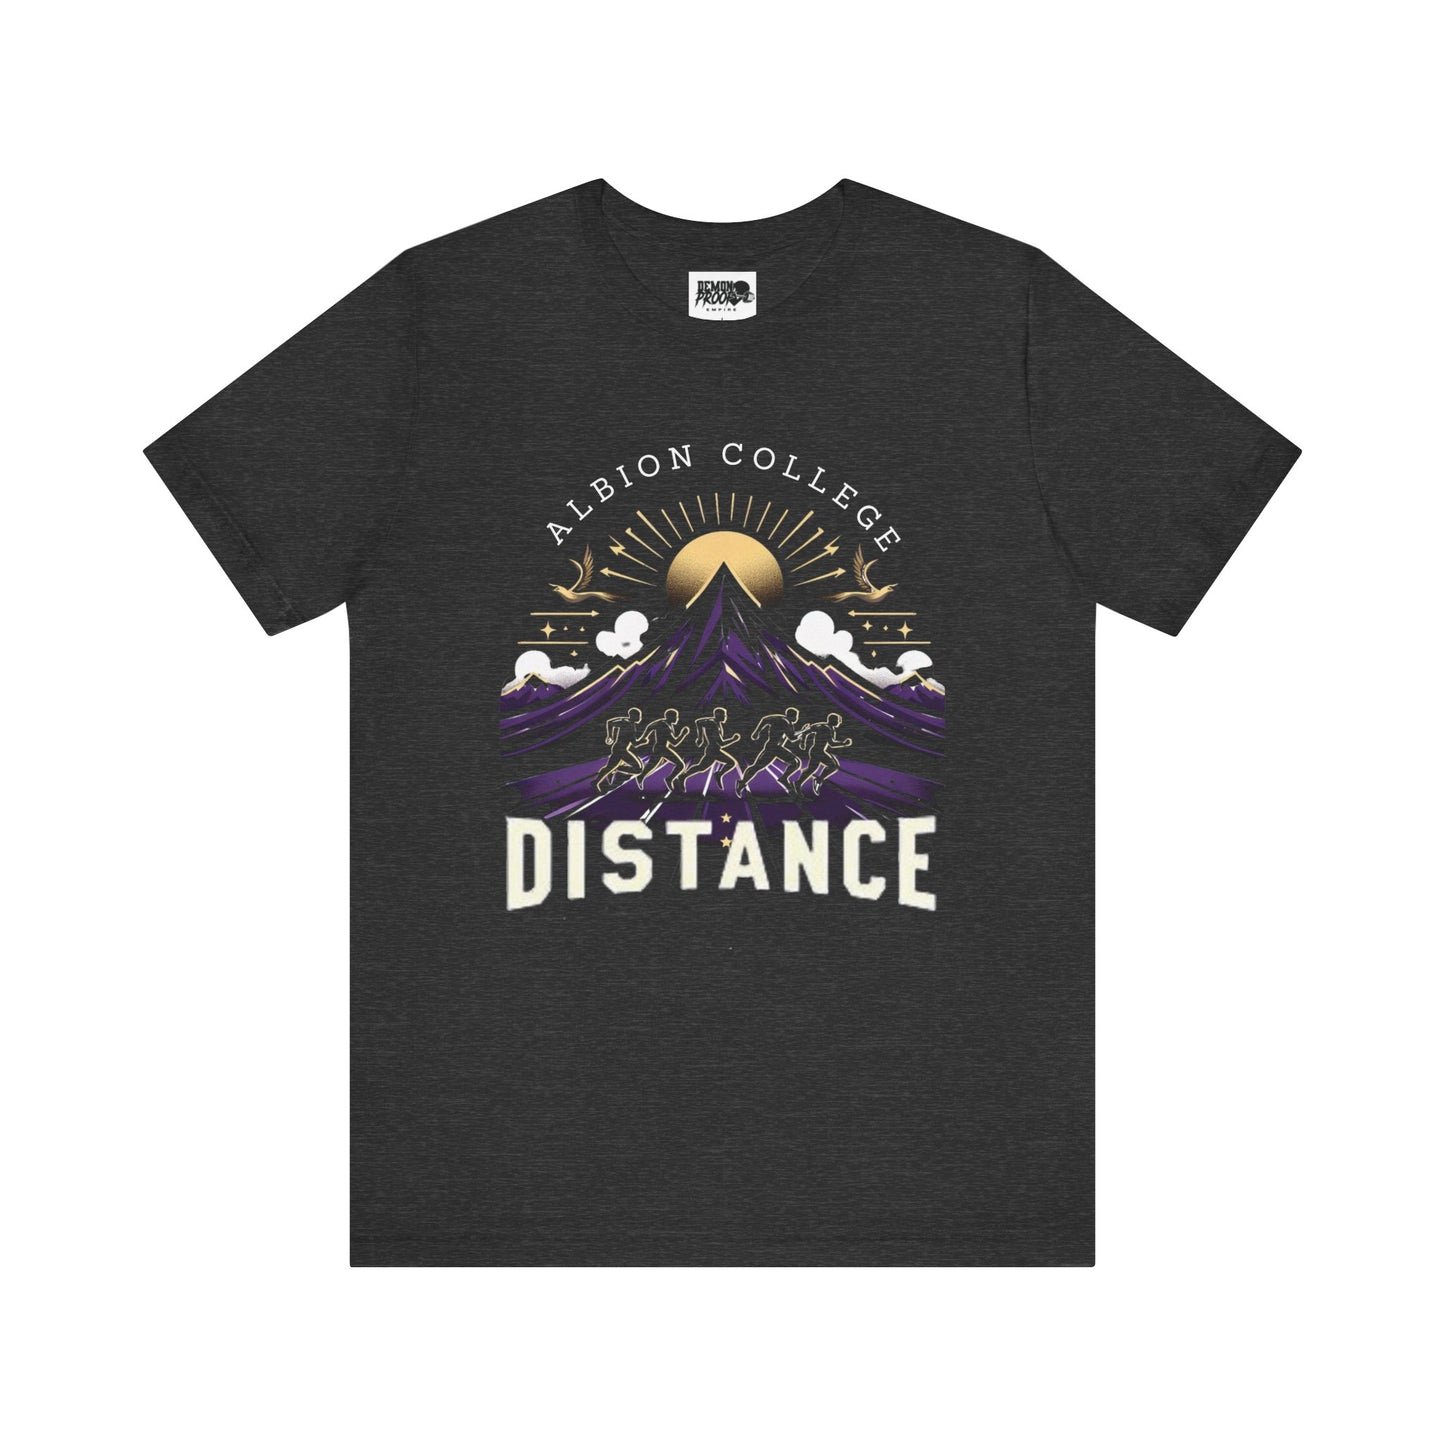 Albion Distance Collab